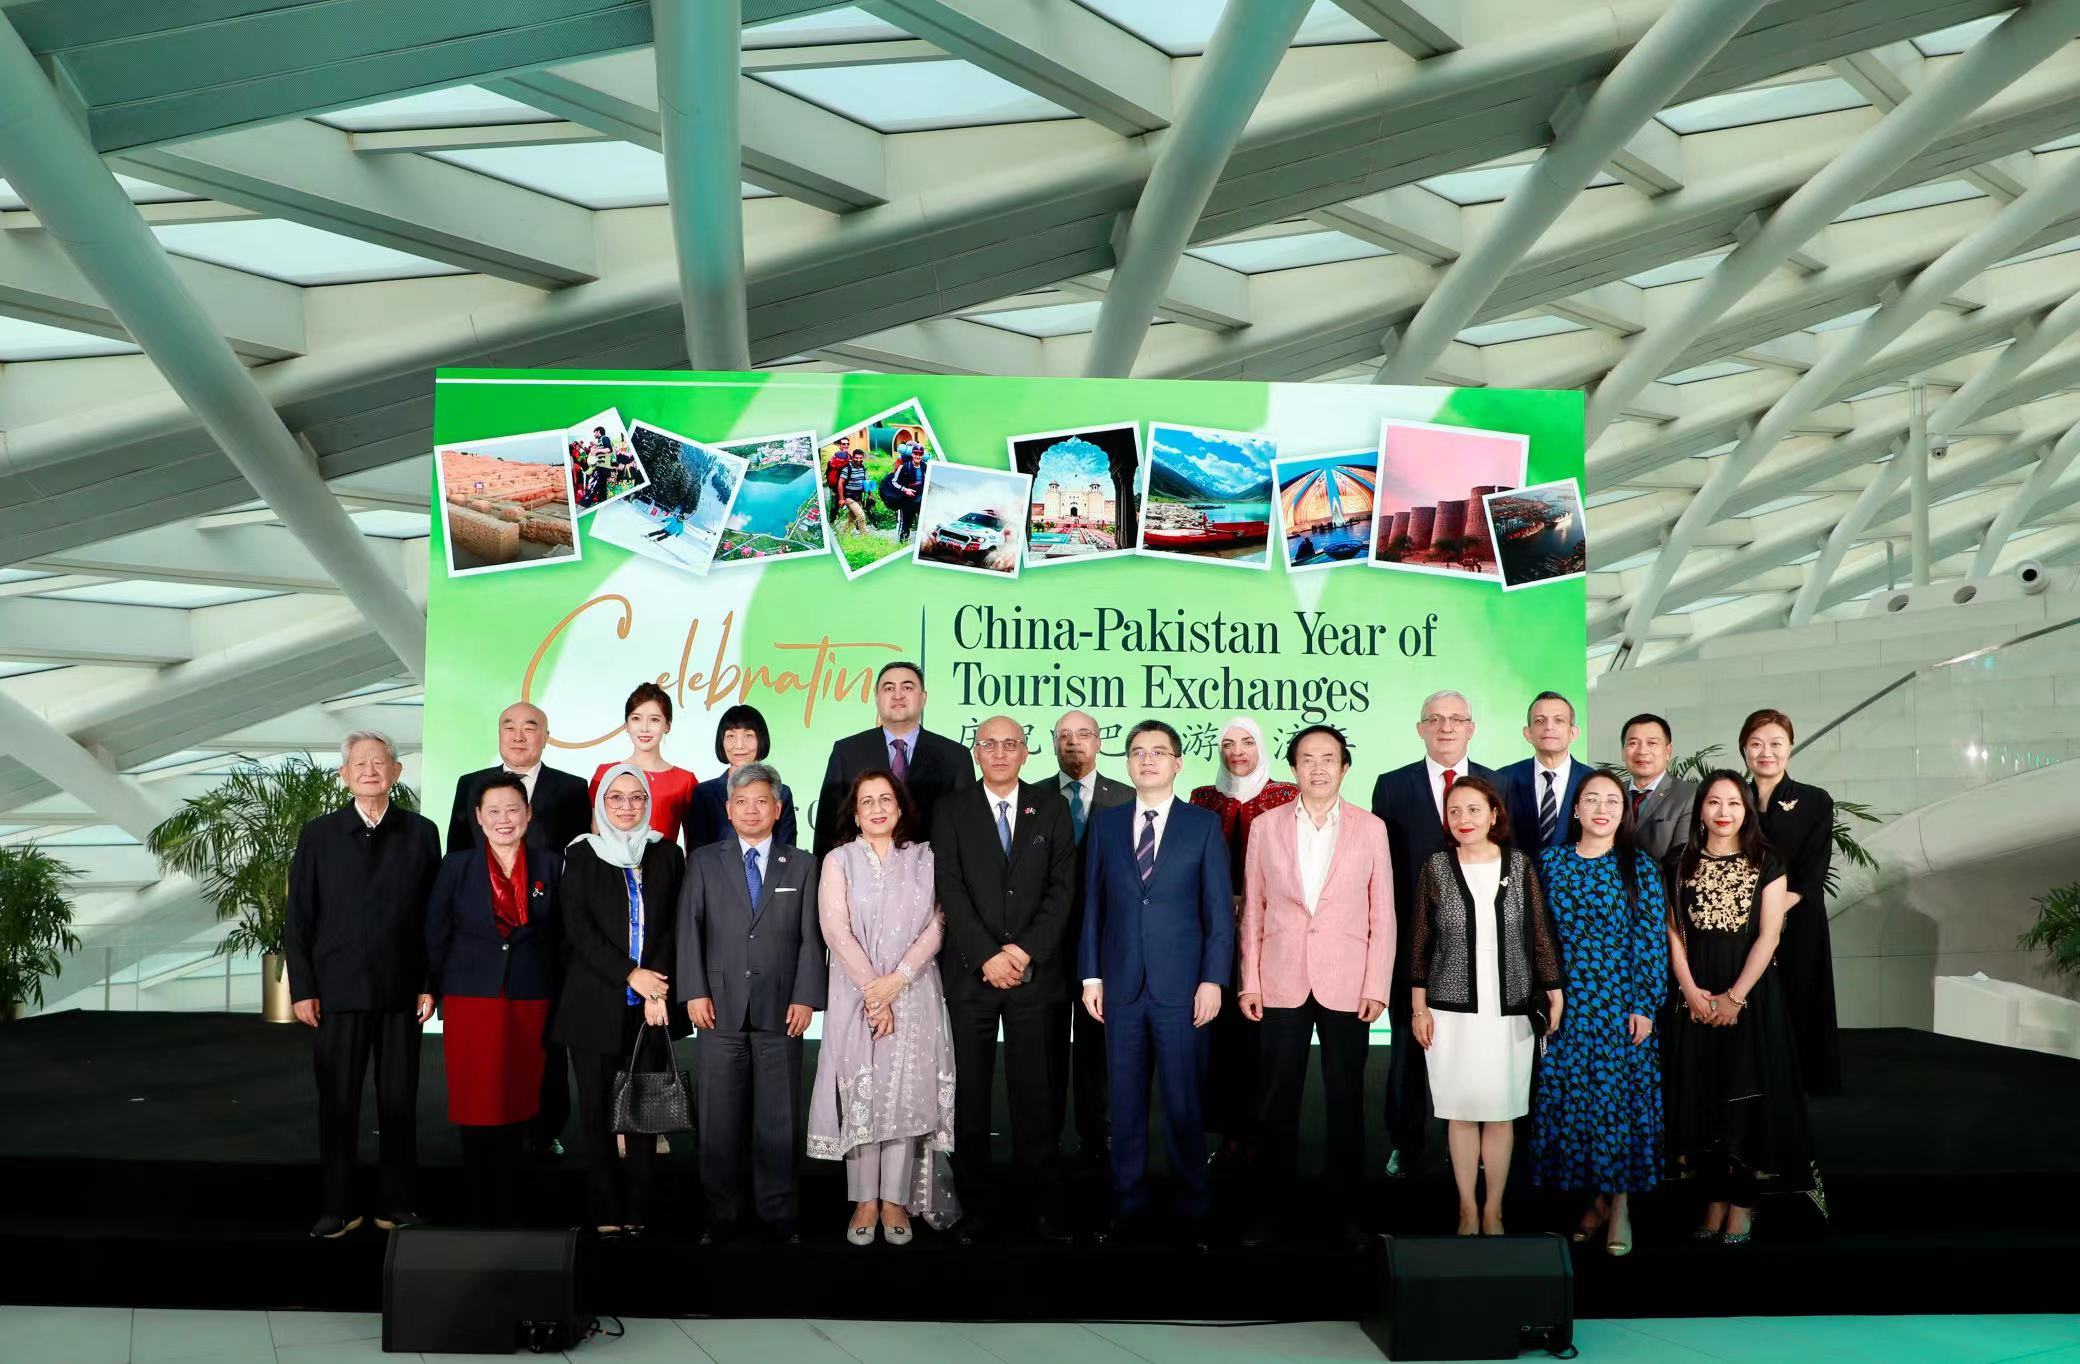 Participants attend Pakistan tourism website in Chinese language launch ceremony. Photo: Courtesy of the Pakistan Embassy in China